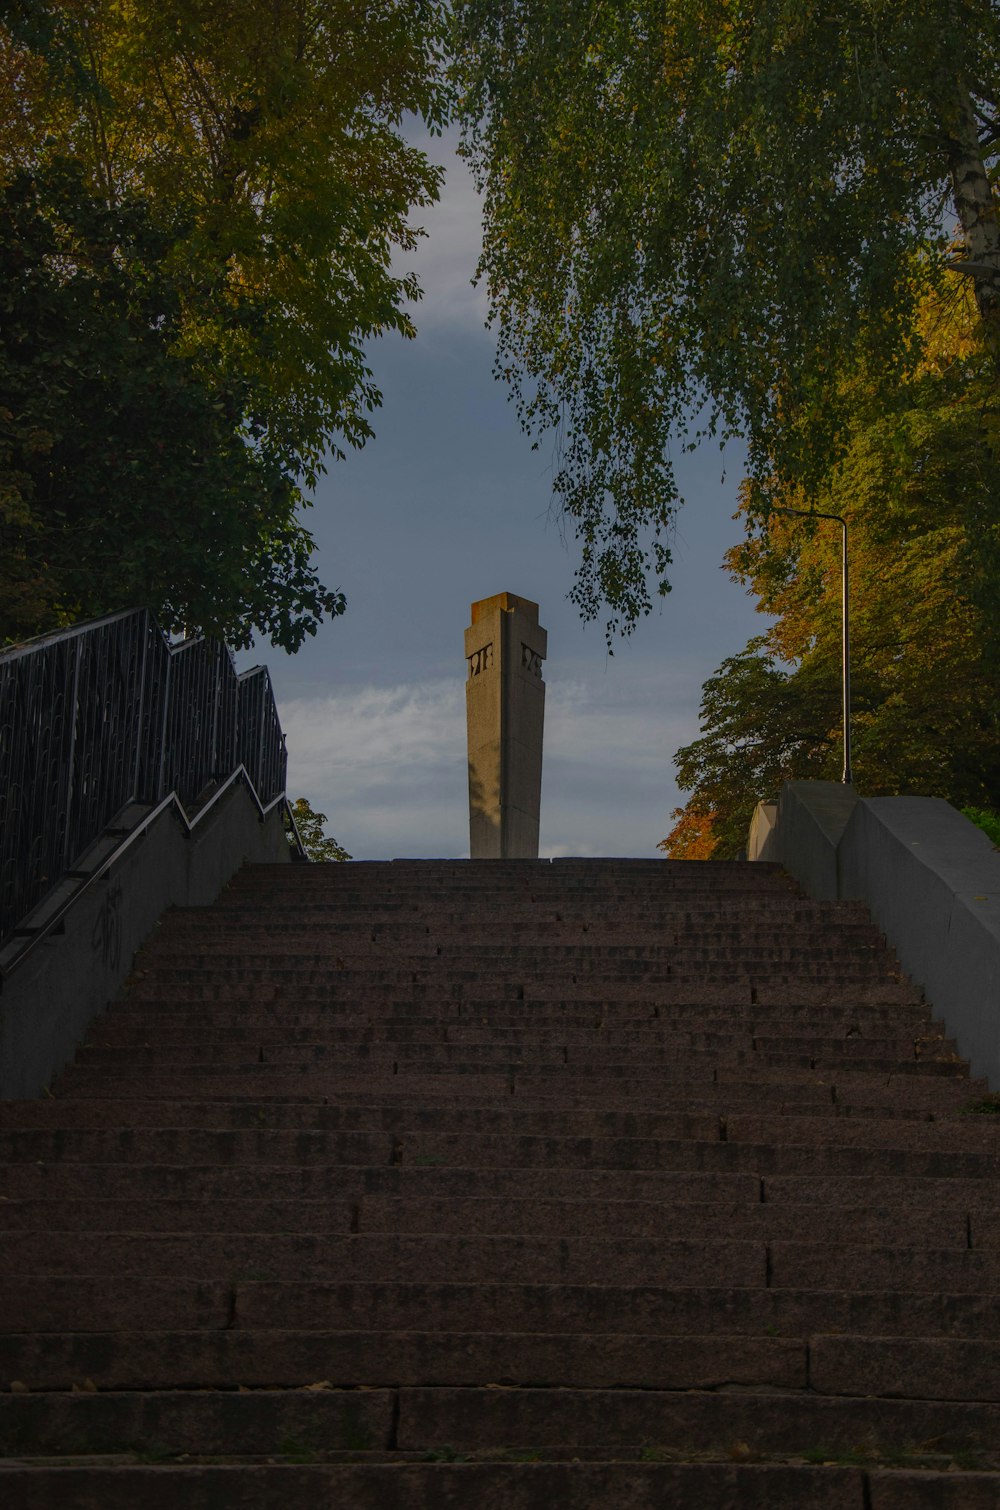 a brick staircase leading up to a tall tower